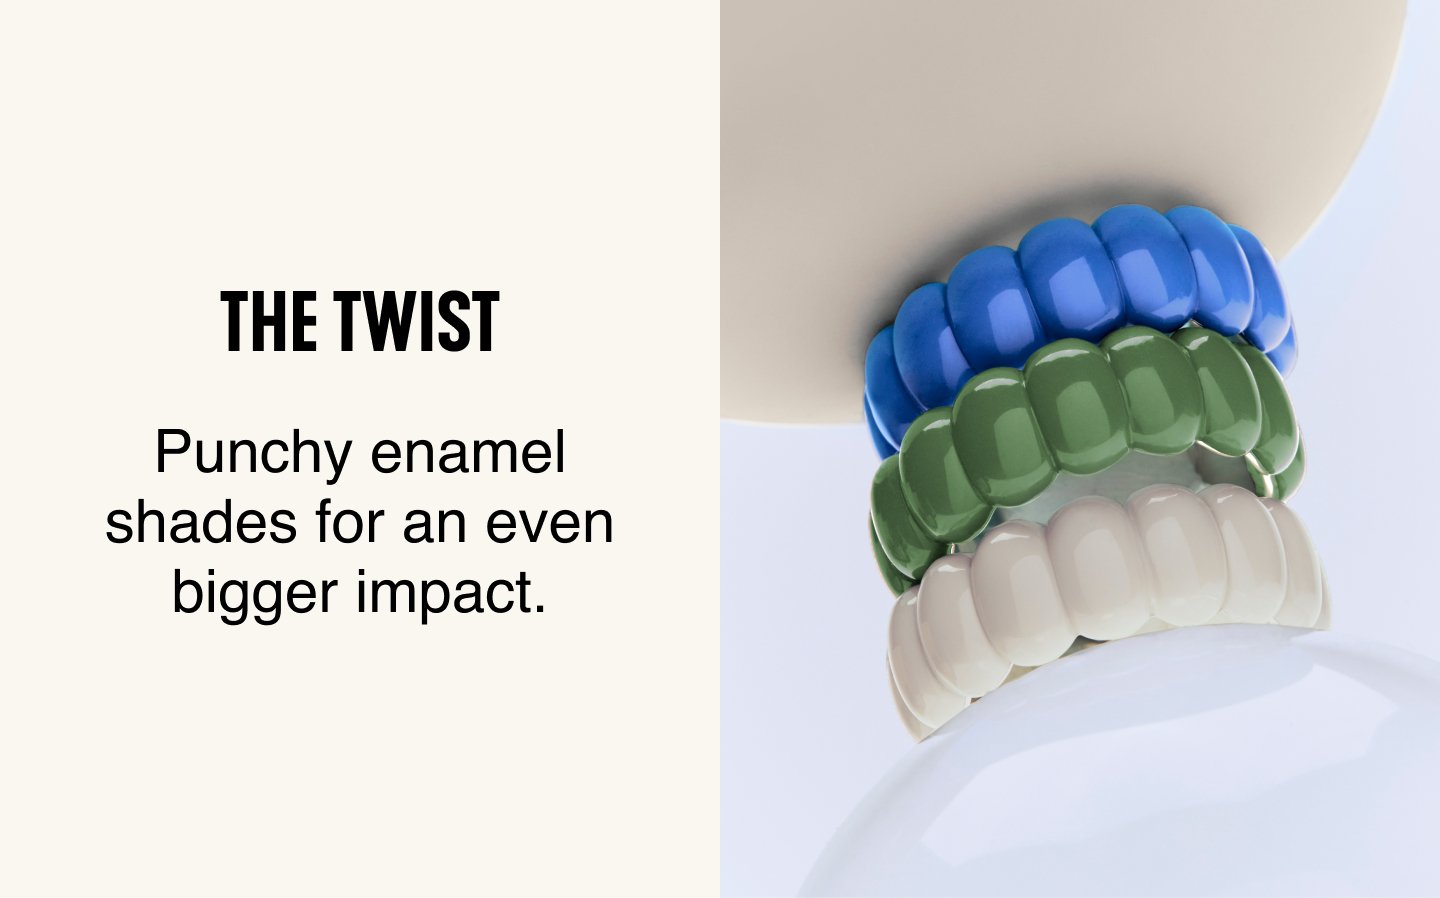 The Twist. Punchy enamel shades for an even bigger impact.